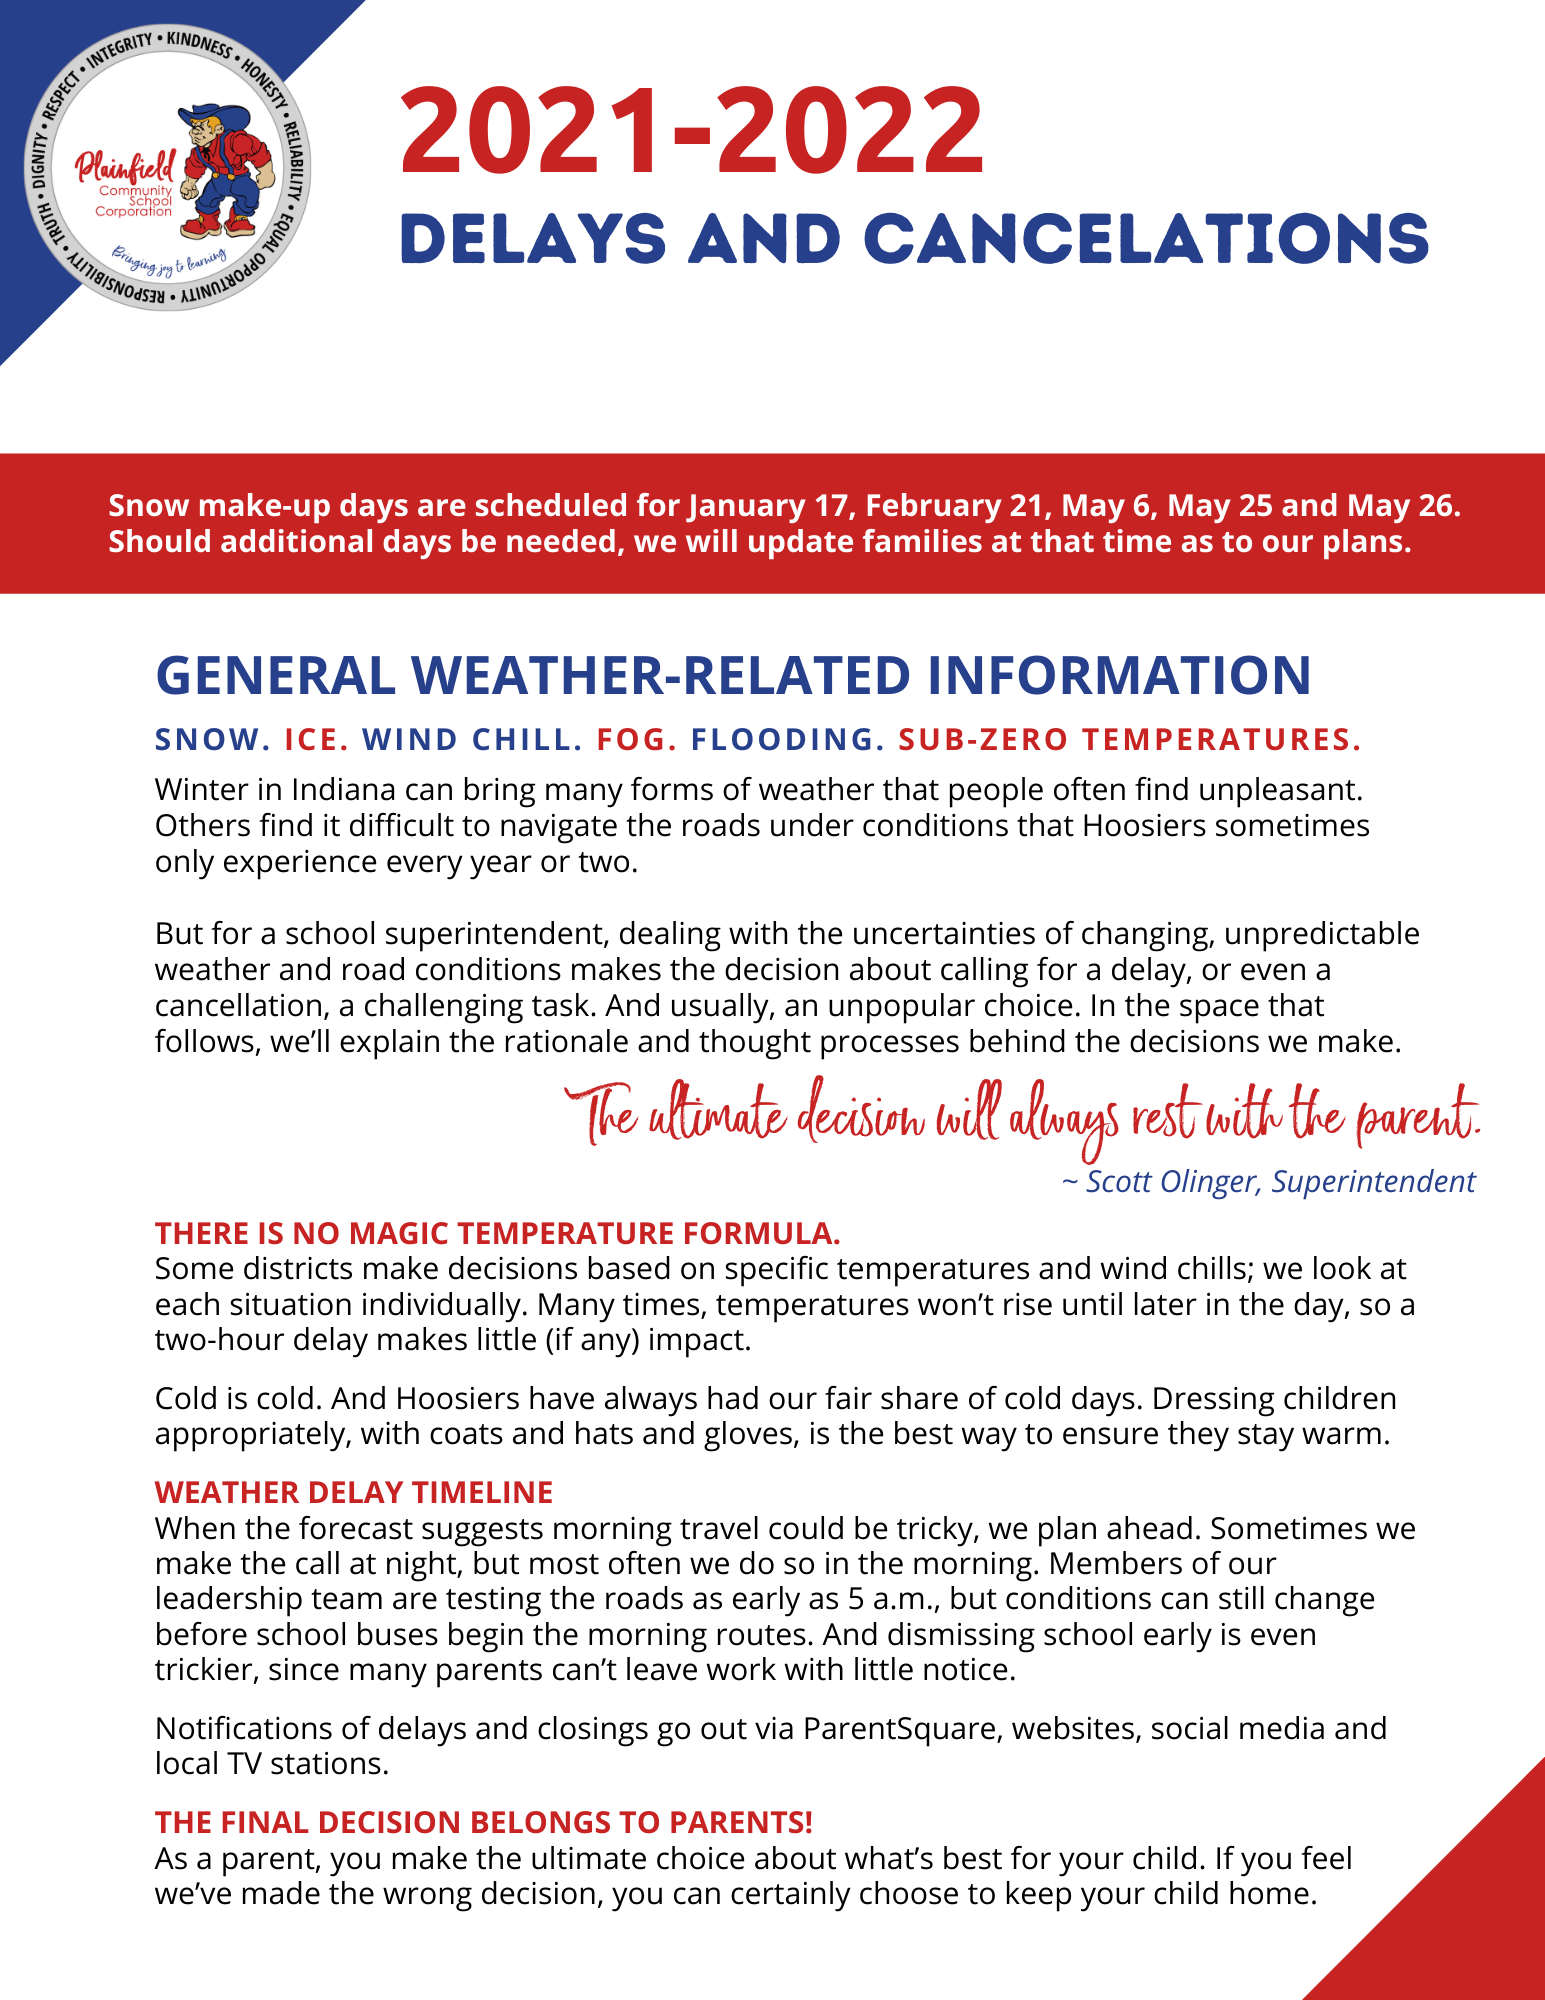 2021-2022 Delays and Cancelations